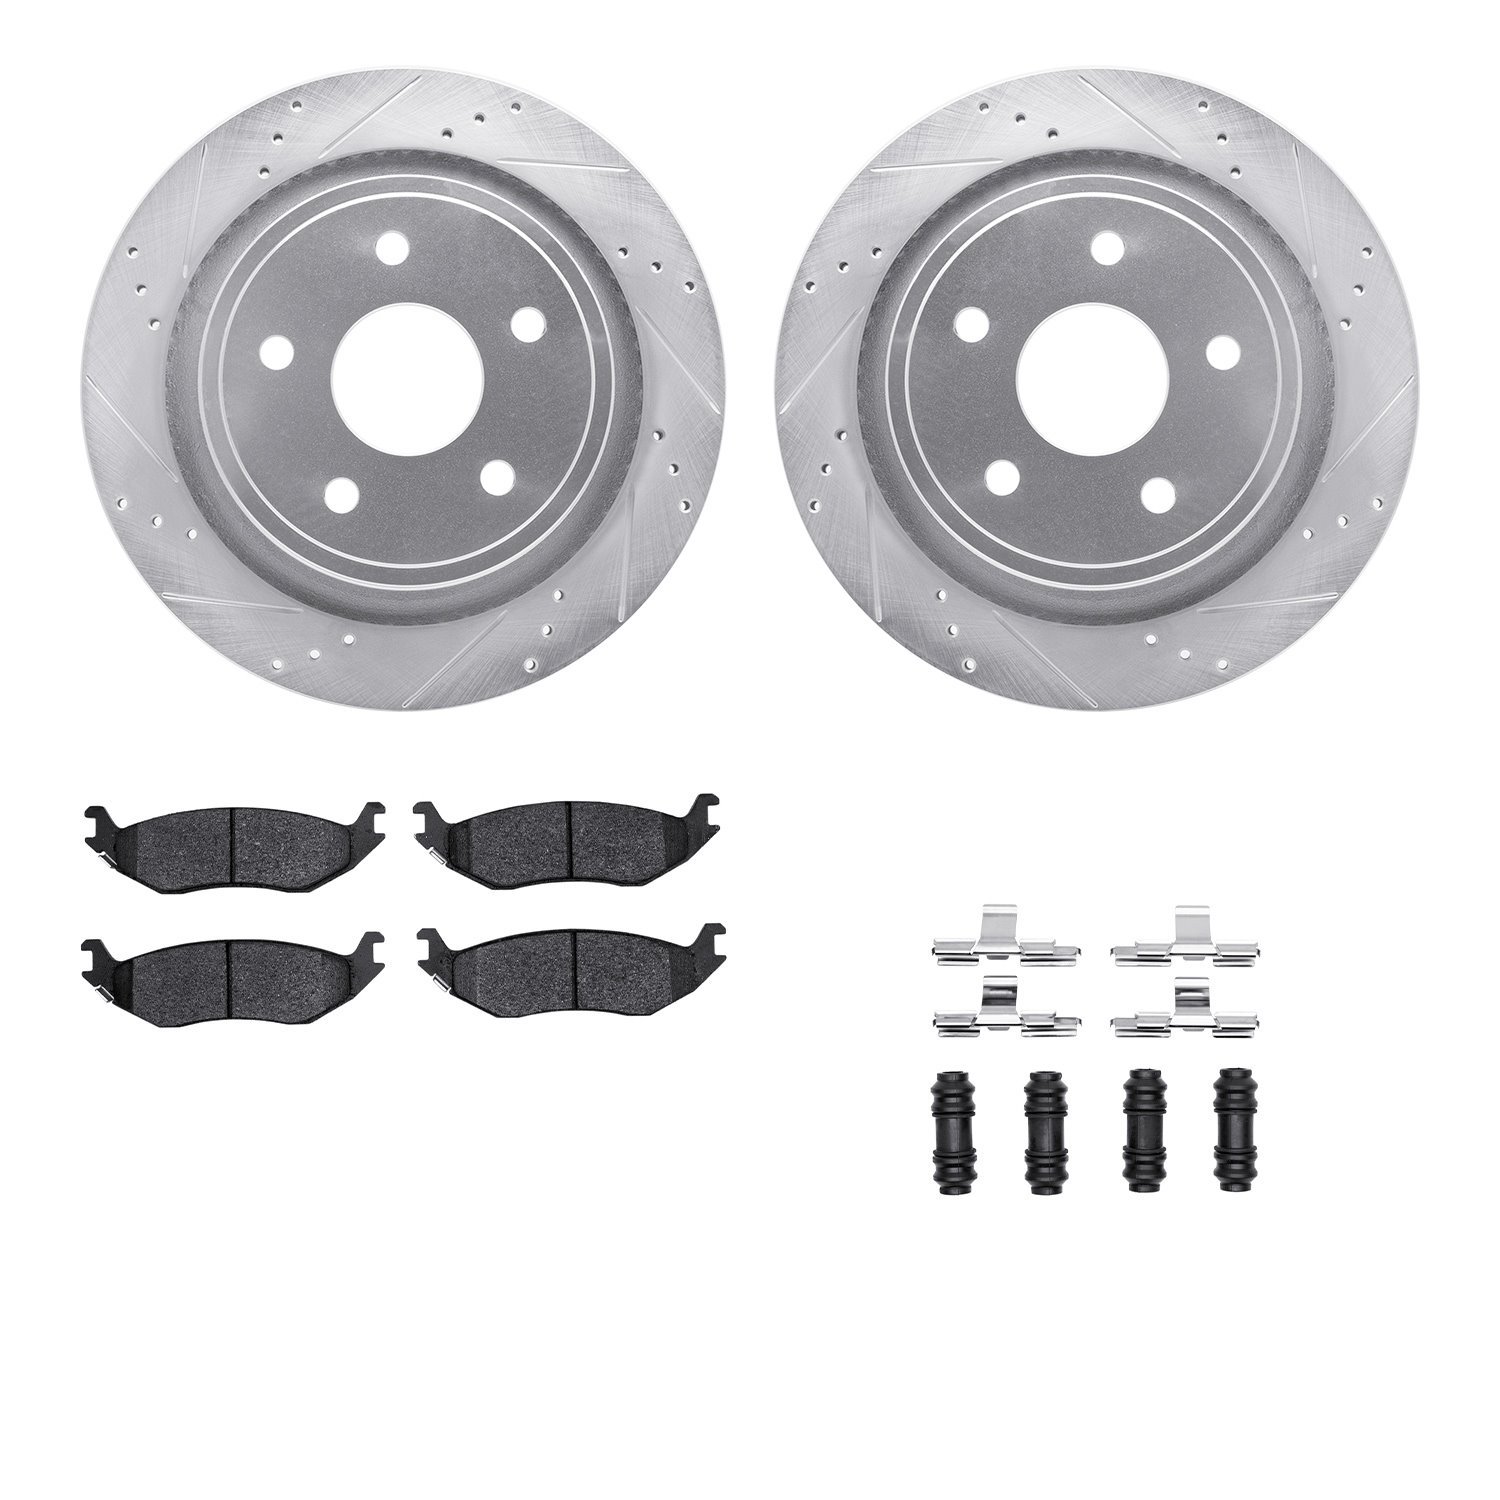 7412-40011 Drilled/Slotted Brake Rotors with Ultimate-Duty Brake Pads Kit & Hardware [Silver], 2002-2018 Mopar, Position: Rear